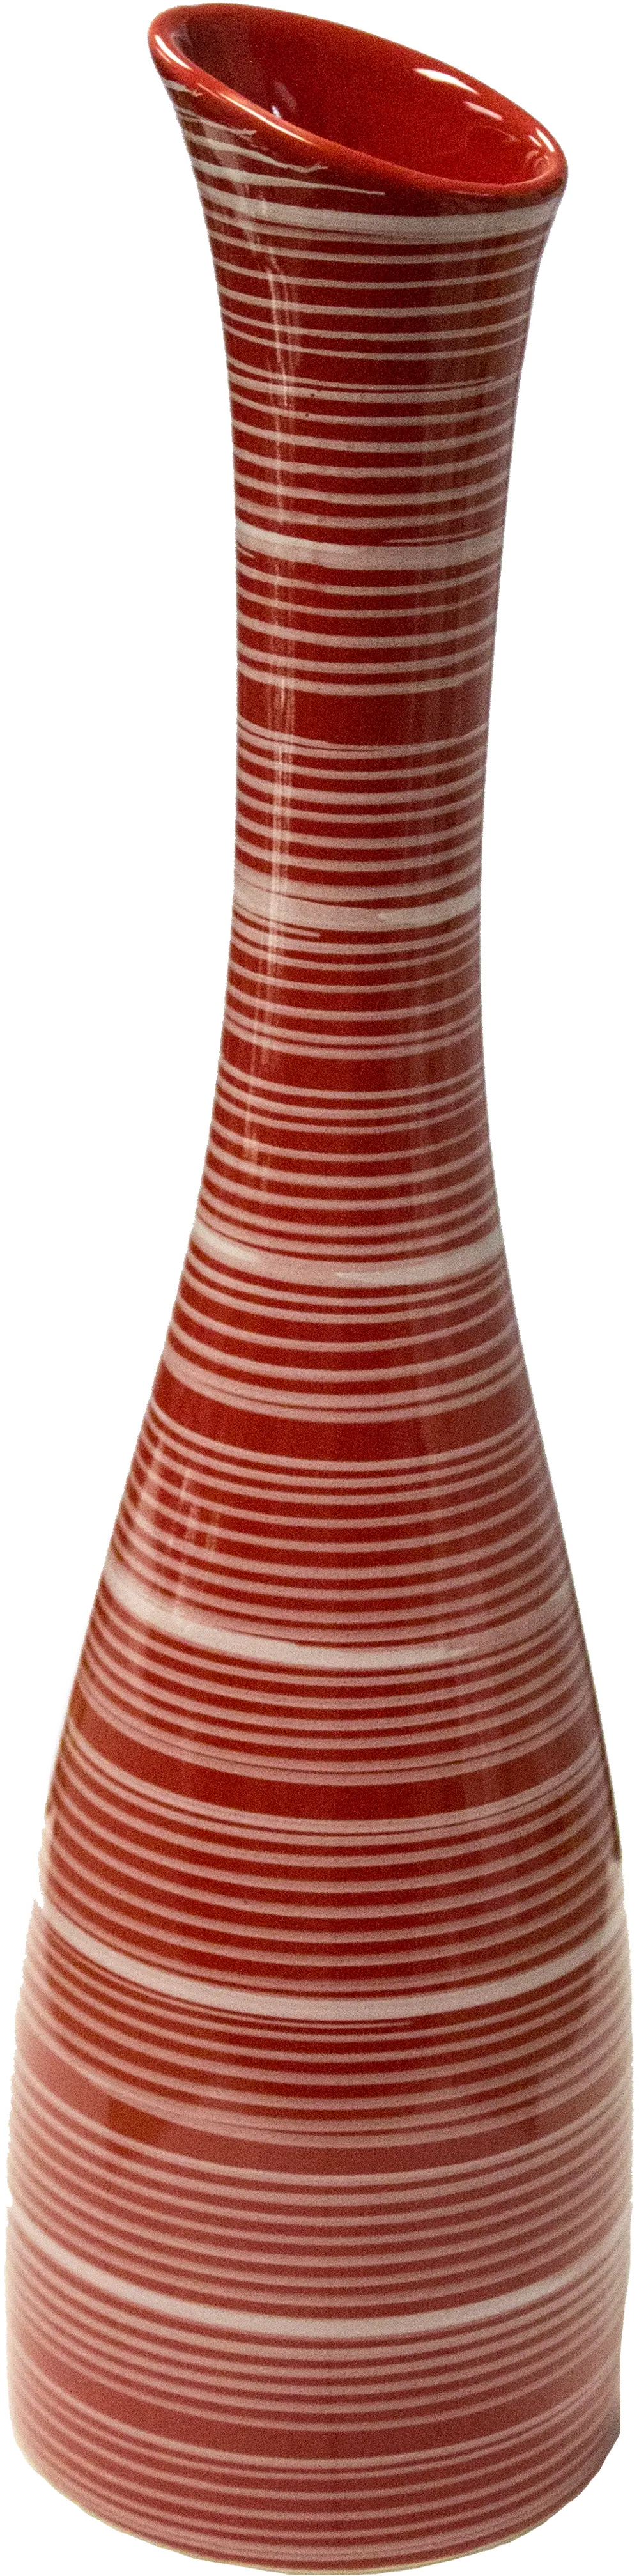 15 Inch Red and White Striped Cylinder Vase-1